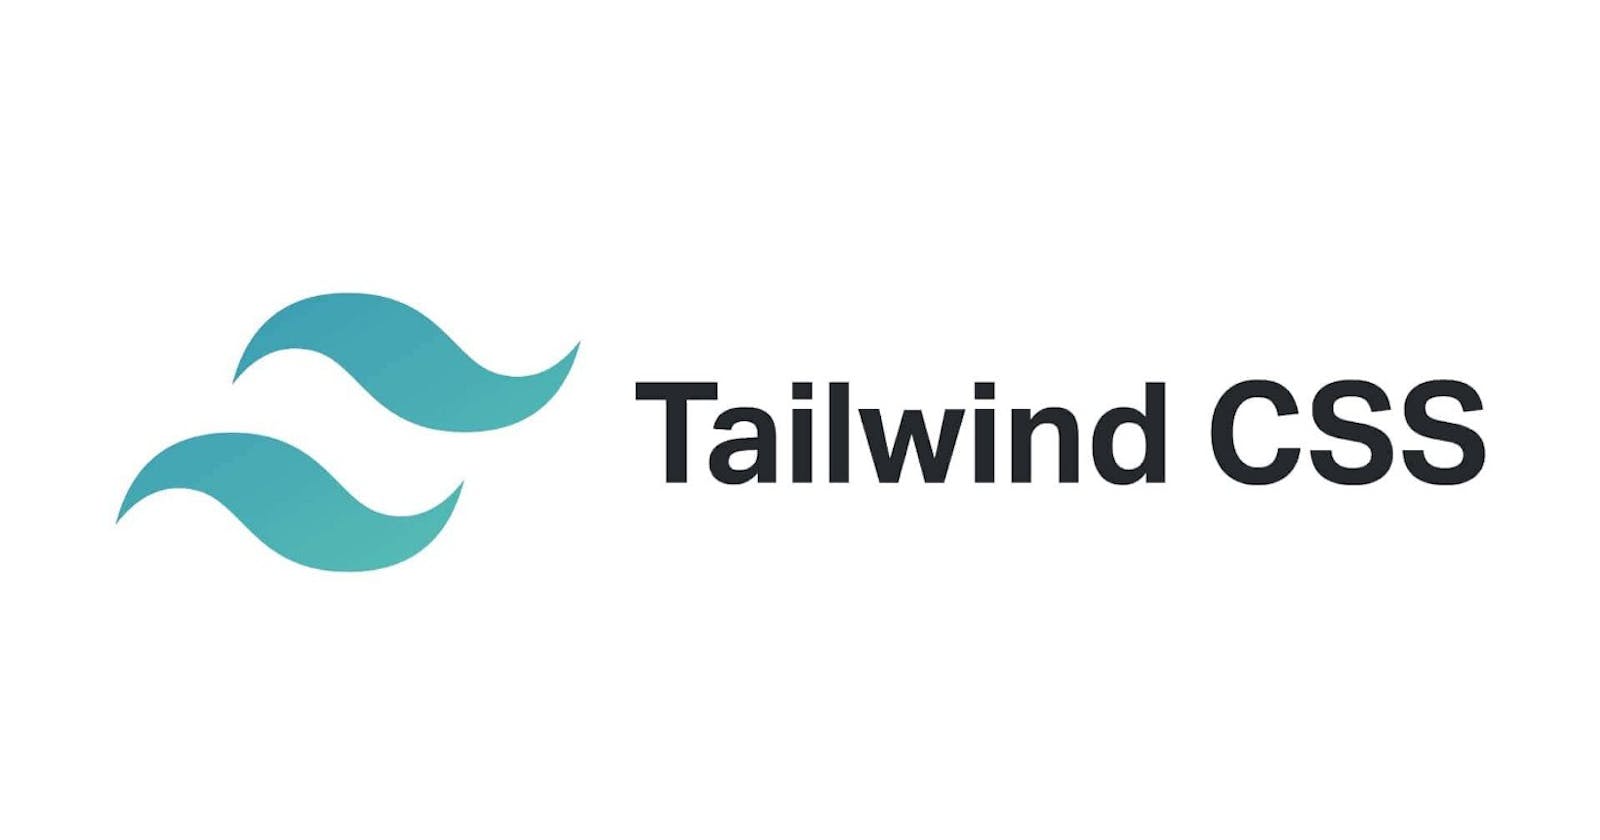 Getting Started With Tailwind CSS